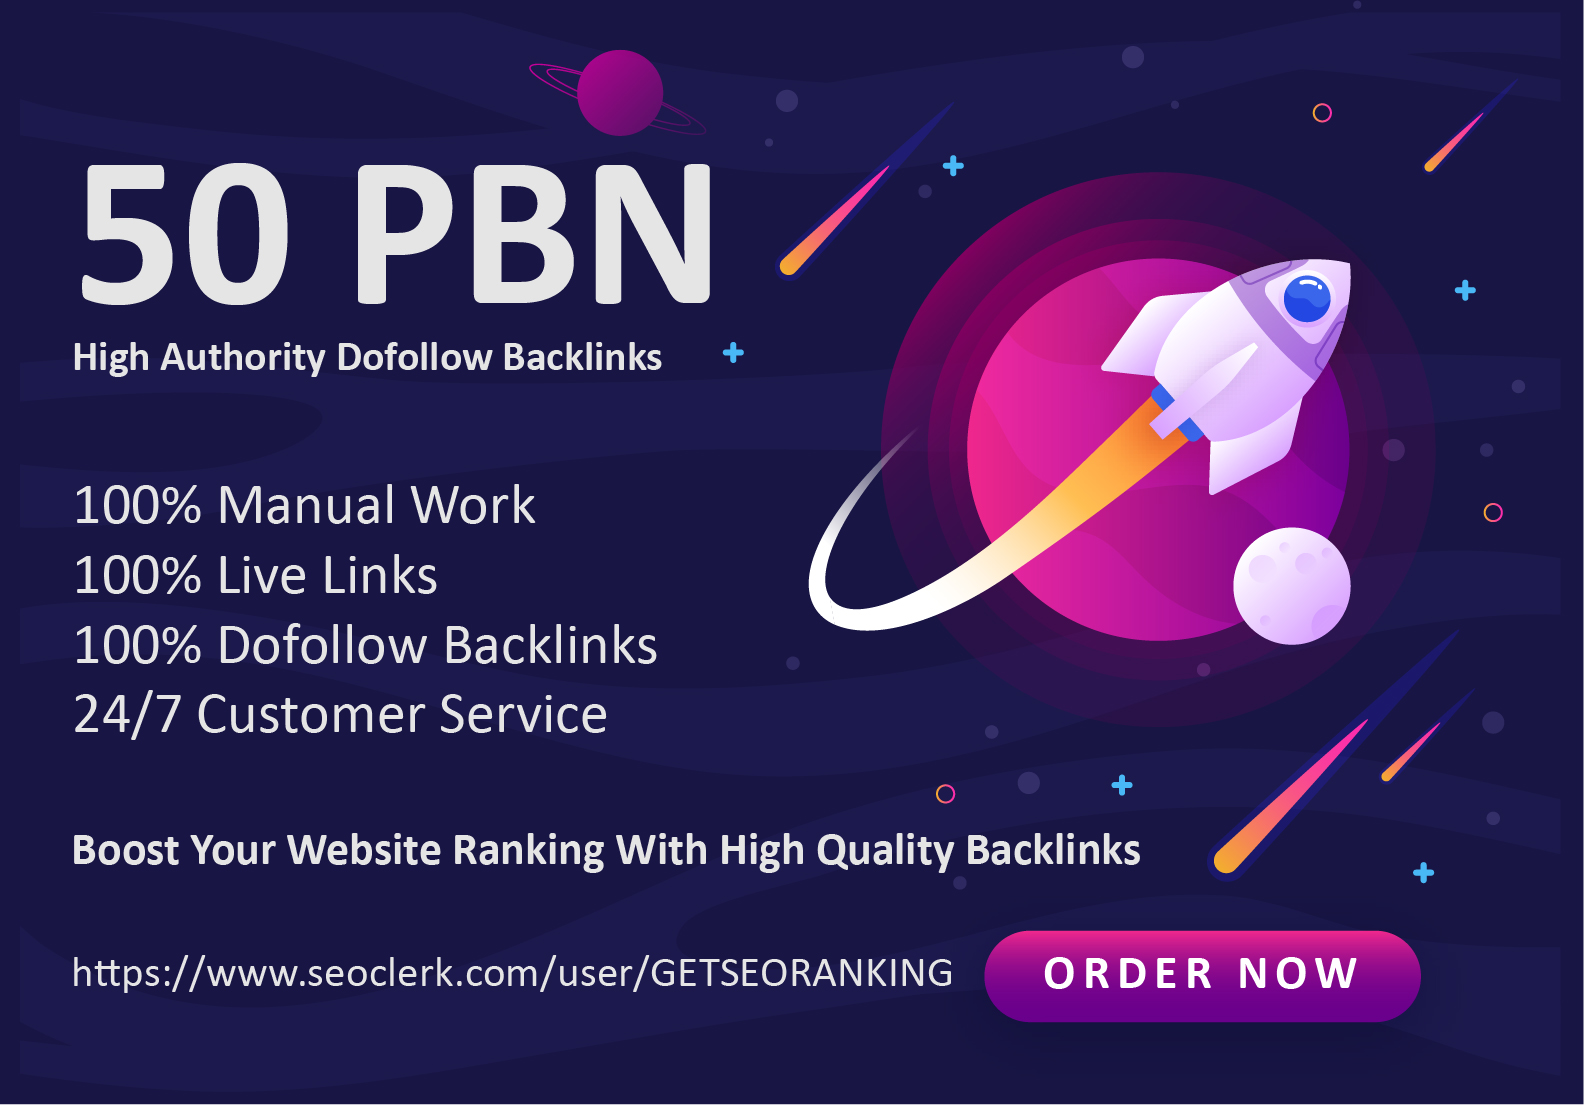 ⭐ High Quality DA50+ PBN backlinks To Boost your website Ranking in Google Search Results ⭐